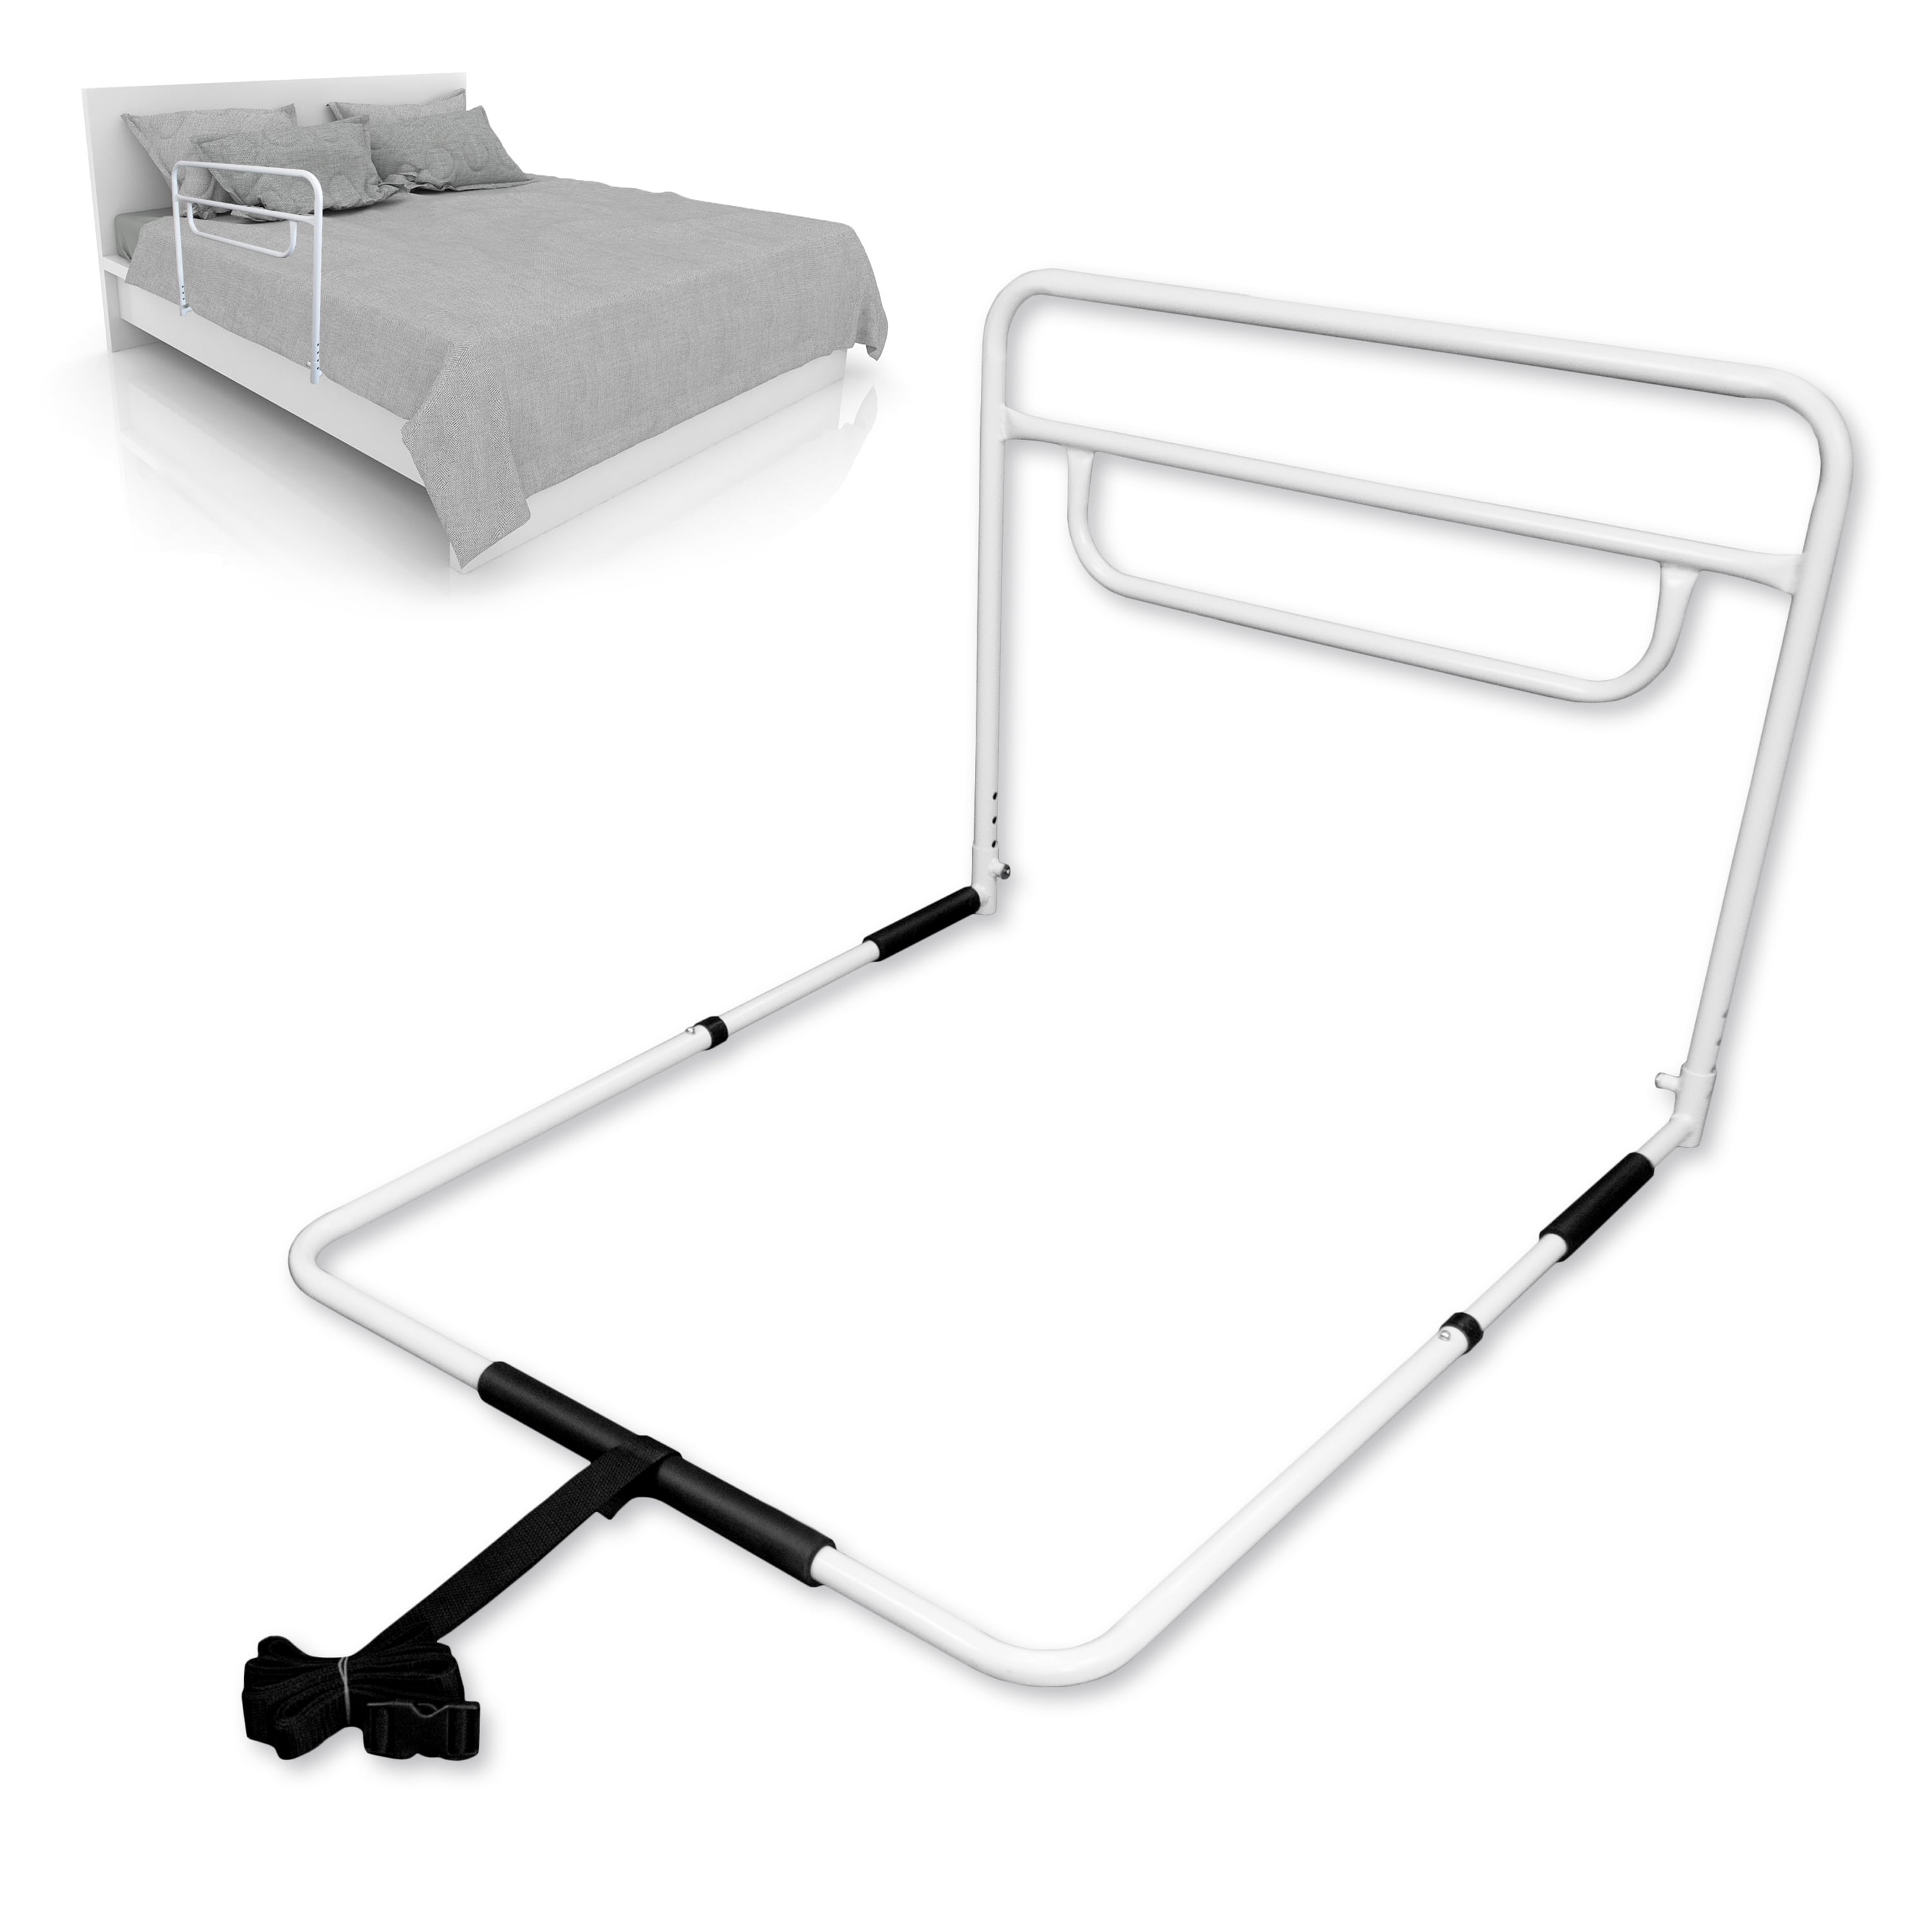 Adjustable Height Bed Assist Rail, Twin Side Bed Rails